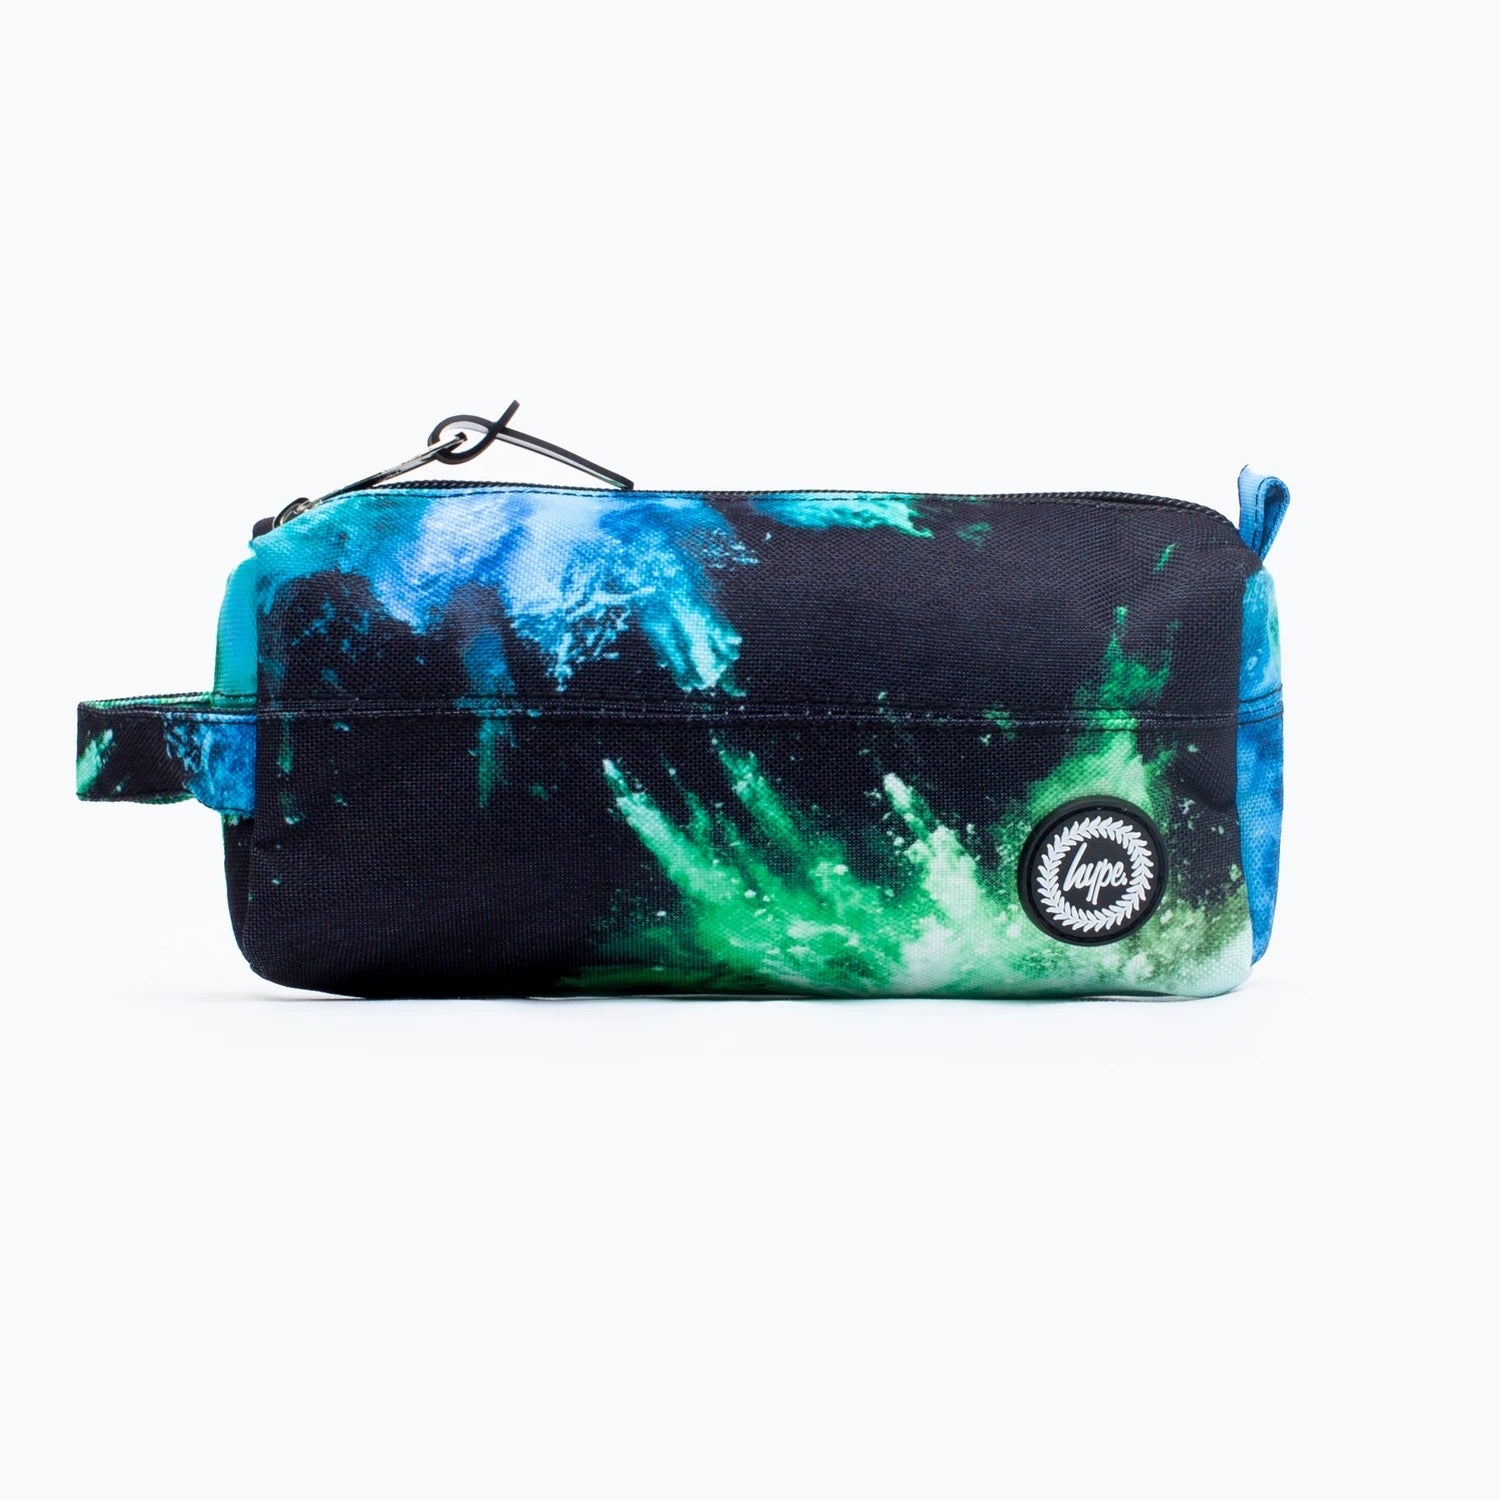 Hype Blue Green Chalk Pencil Case Twlg-870 Accessories ONE SIZE / Multi